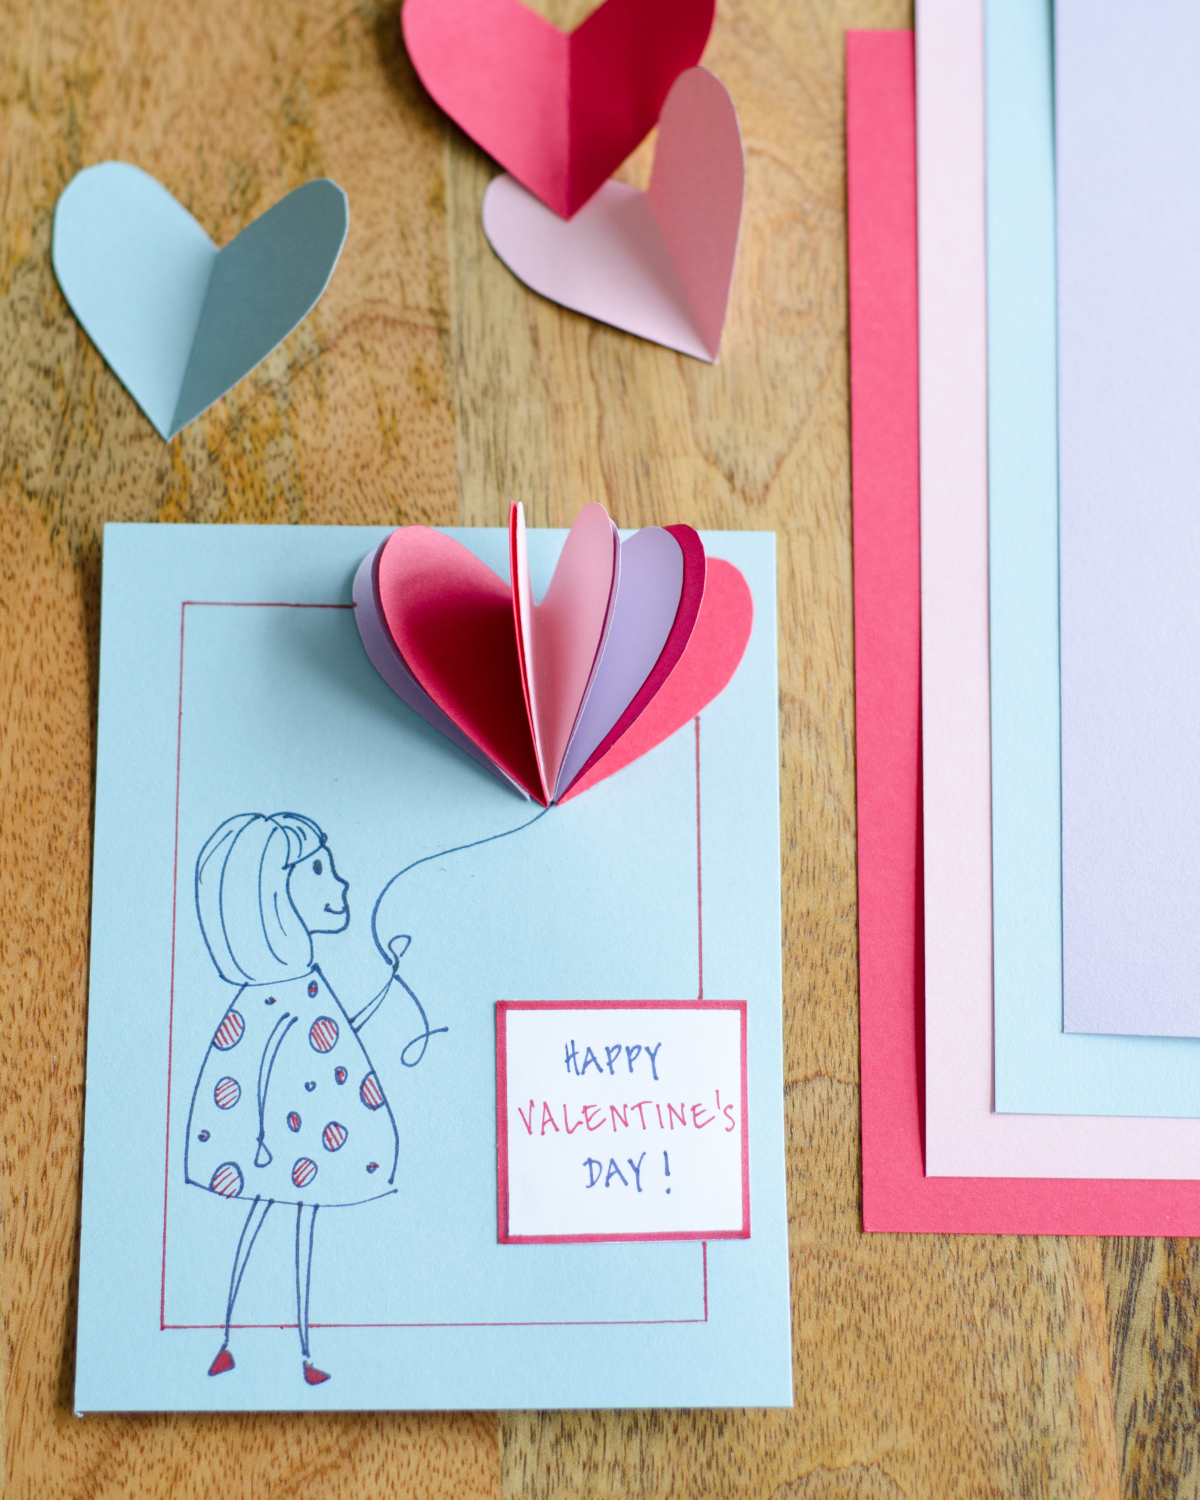 Easy DIY Valentines with 3D paper hearts. Great Valentine's craft for kids that can also be used for exchanging cards at school!